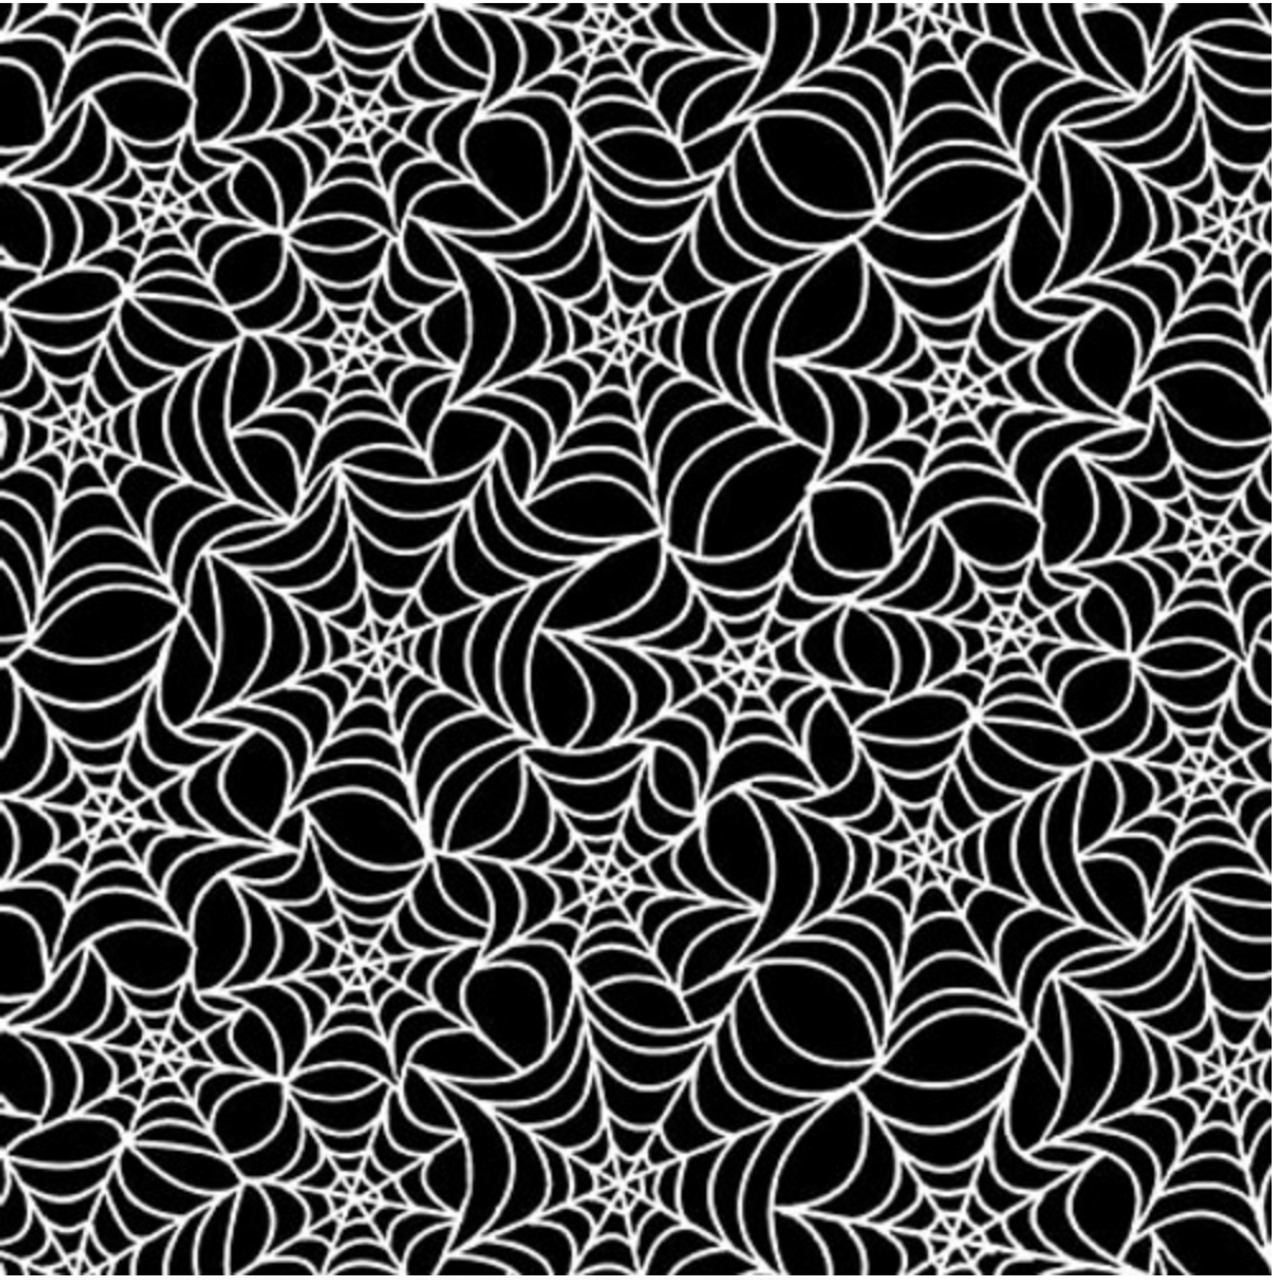 Henry Glass Boo! Glow Spiderweb Black Fabric By The Yard